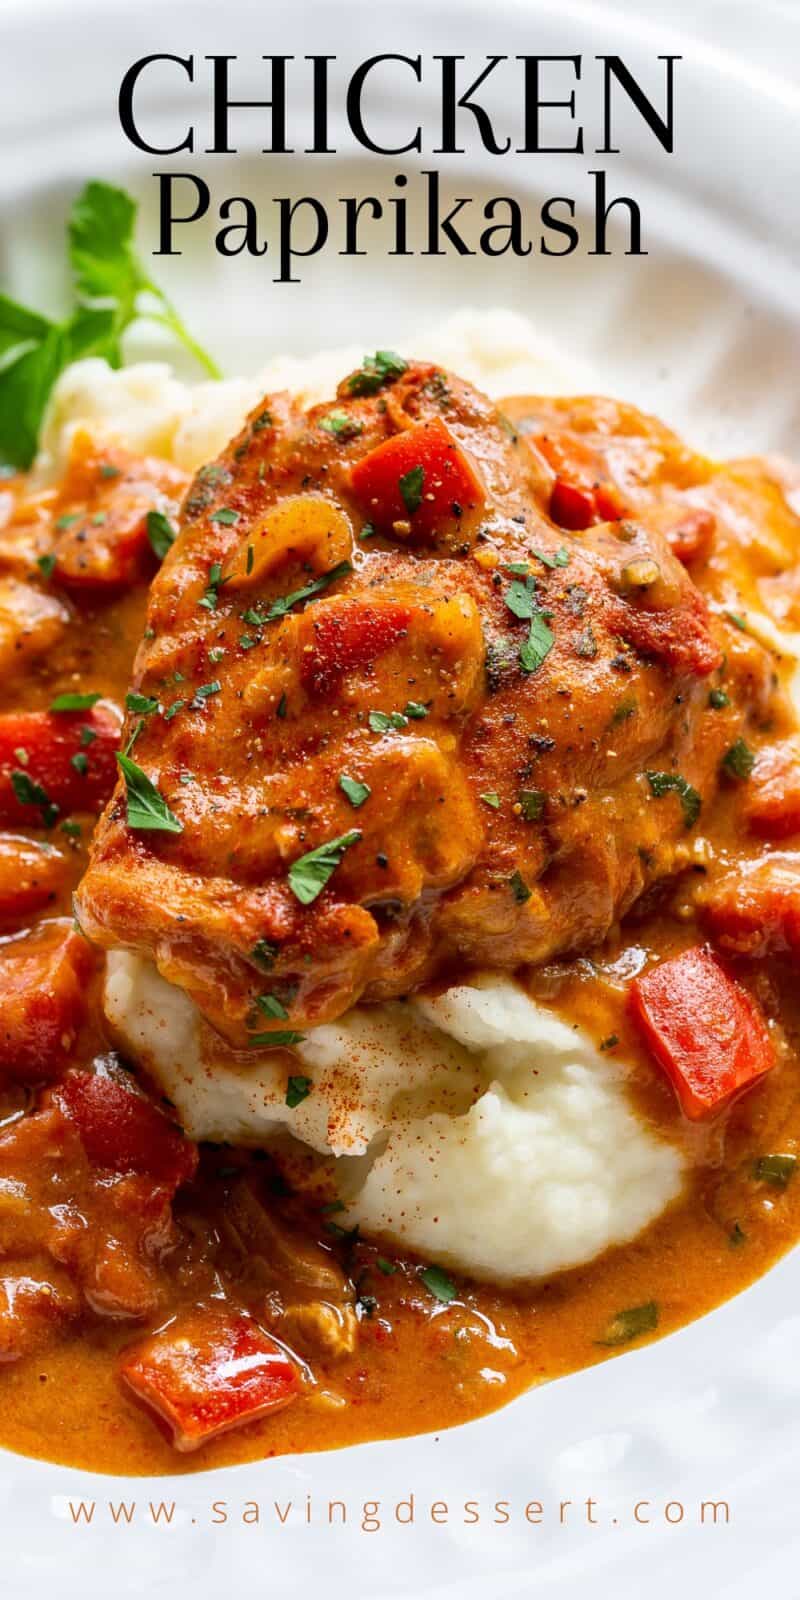 closeup photo of a bowl filled with mashed potatoes topped with chicken paprikash